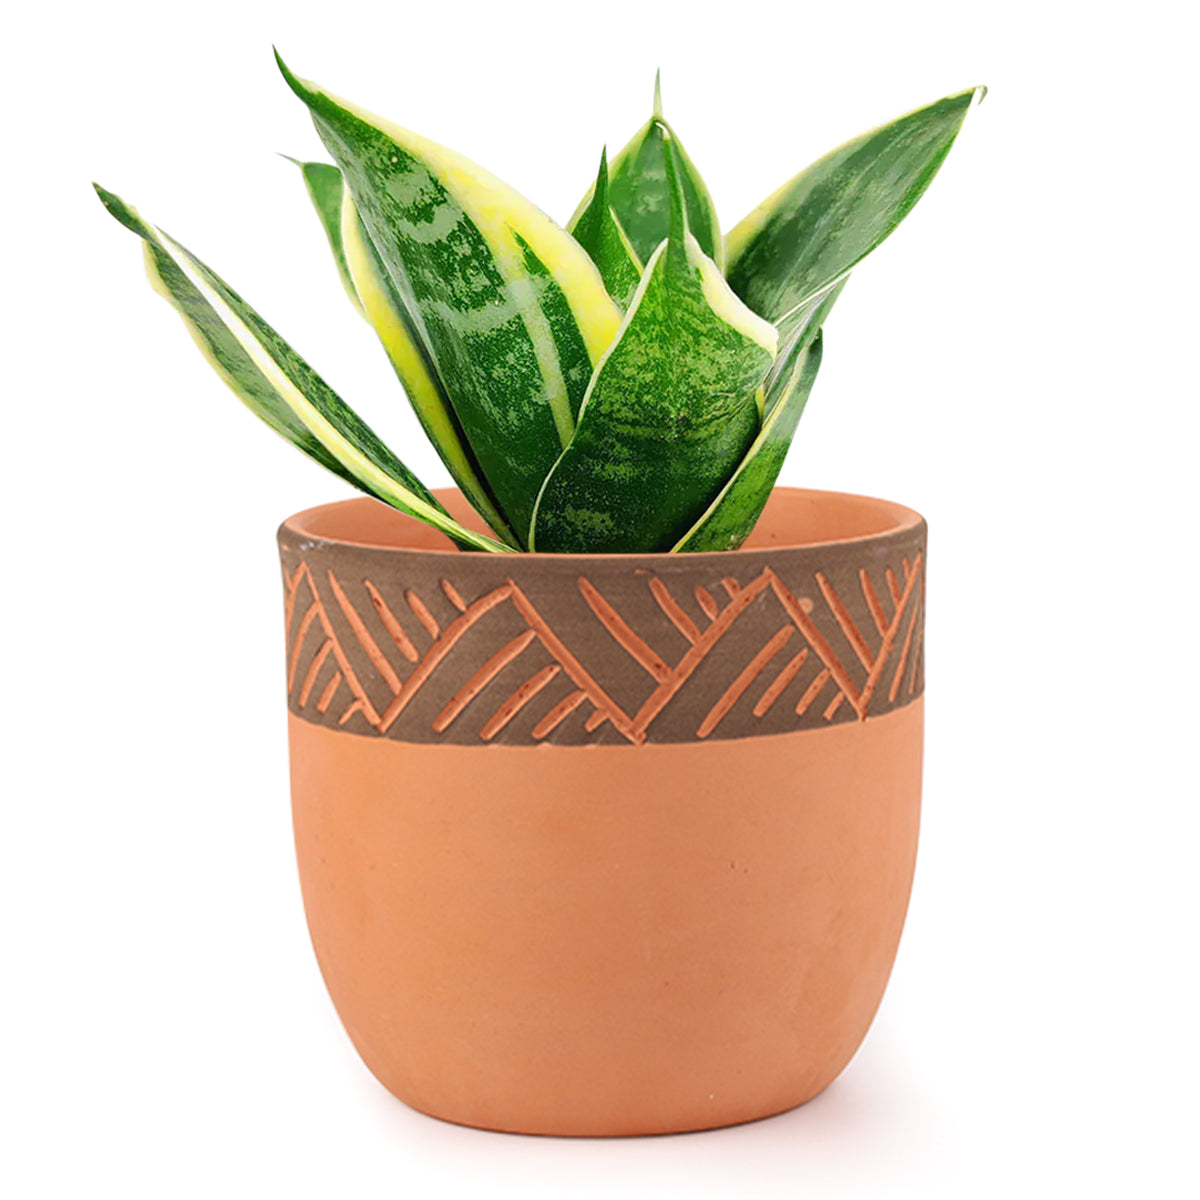 Buy 5.5 inch Clay-Black Color Modern Pot online, Large Terracotta Pot for Succulents and Houseplants